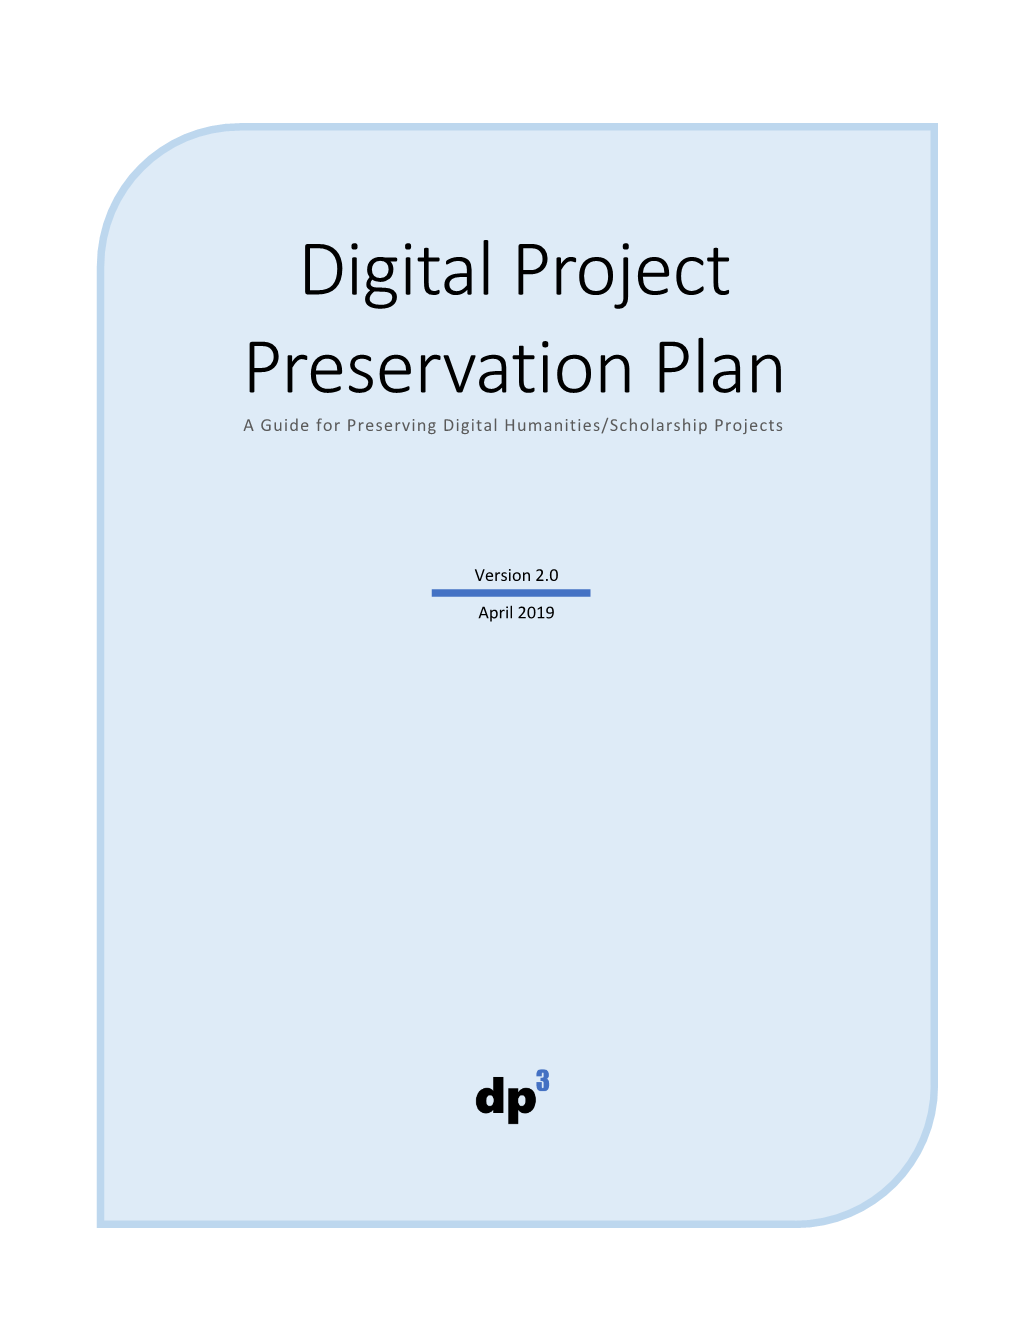 Digital Project Preservation Plan a Guide for Preserving Digital Humanities/Scholarship Projects